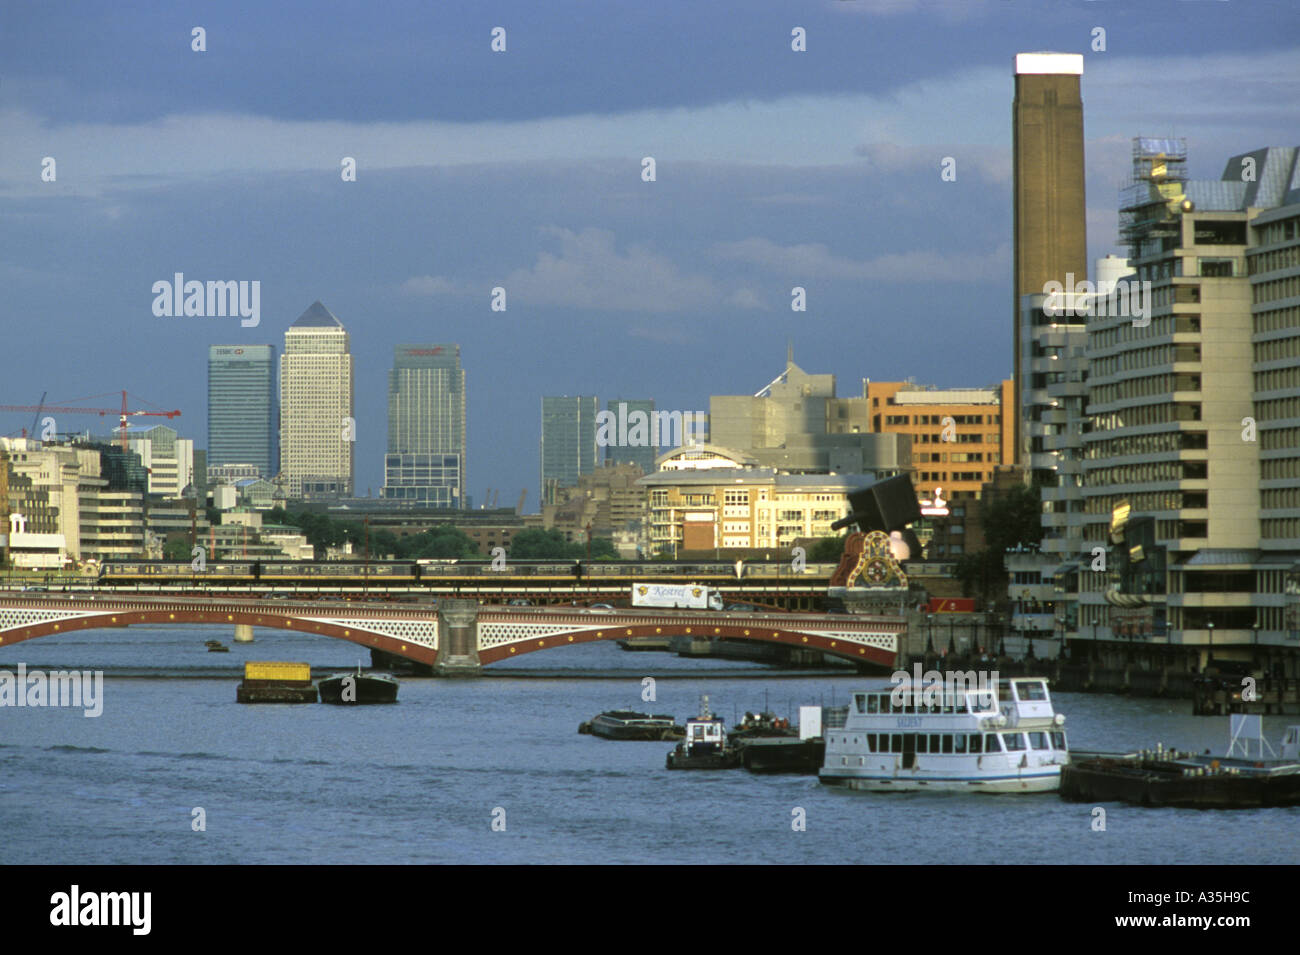 Looking east along the Thames River in London towards the Tate Modern and the towers of Canary Wharf in the distance Stock Photo